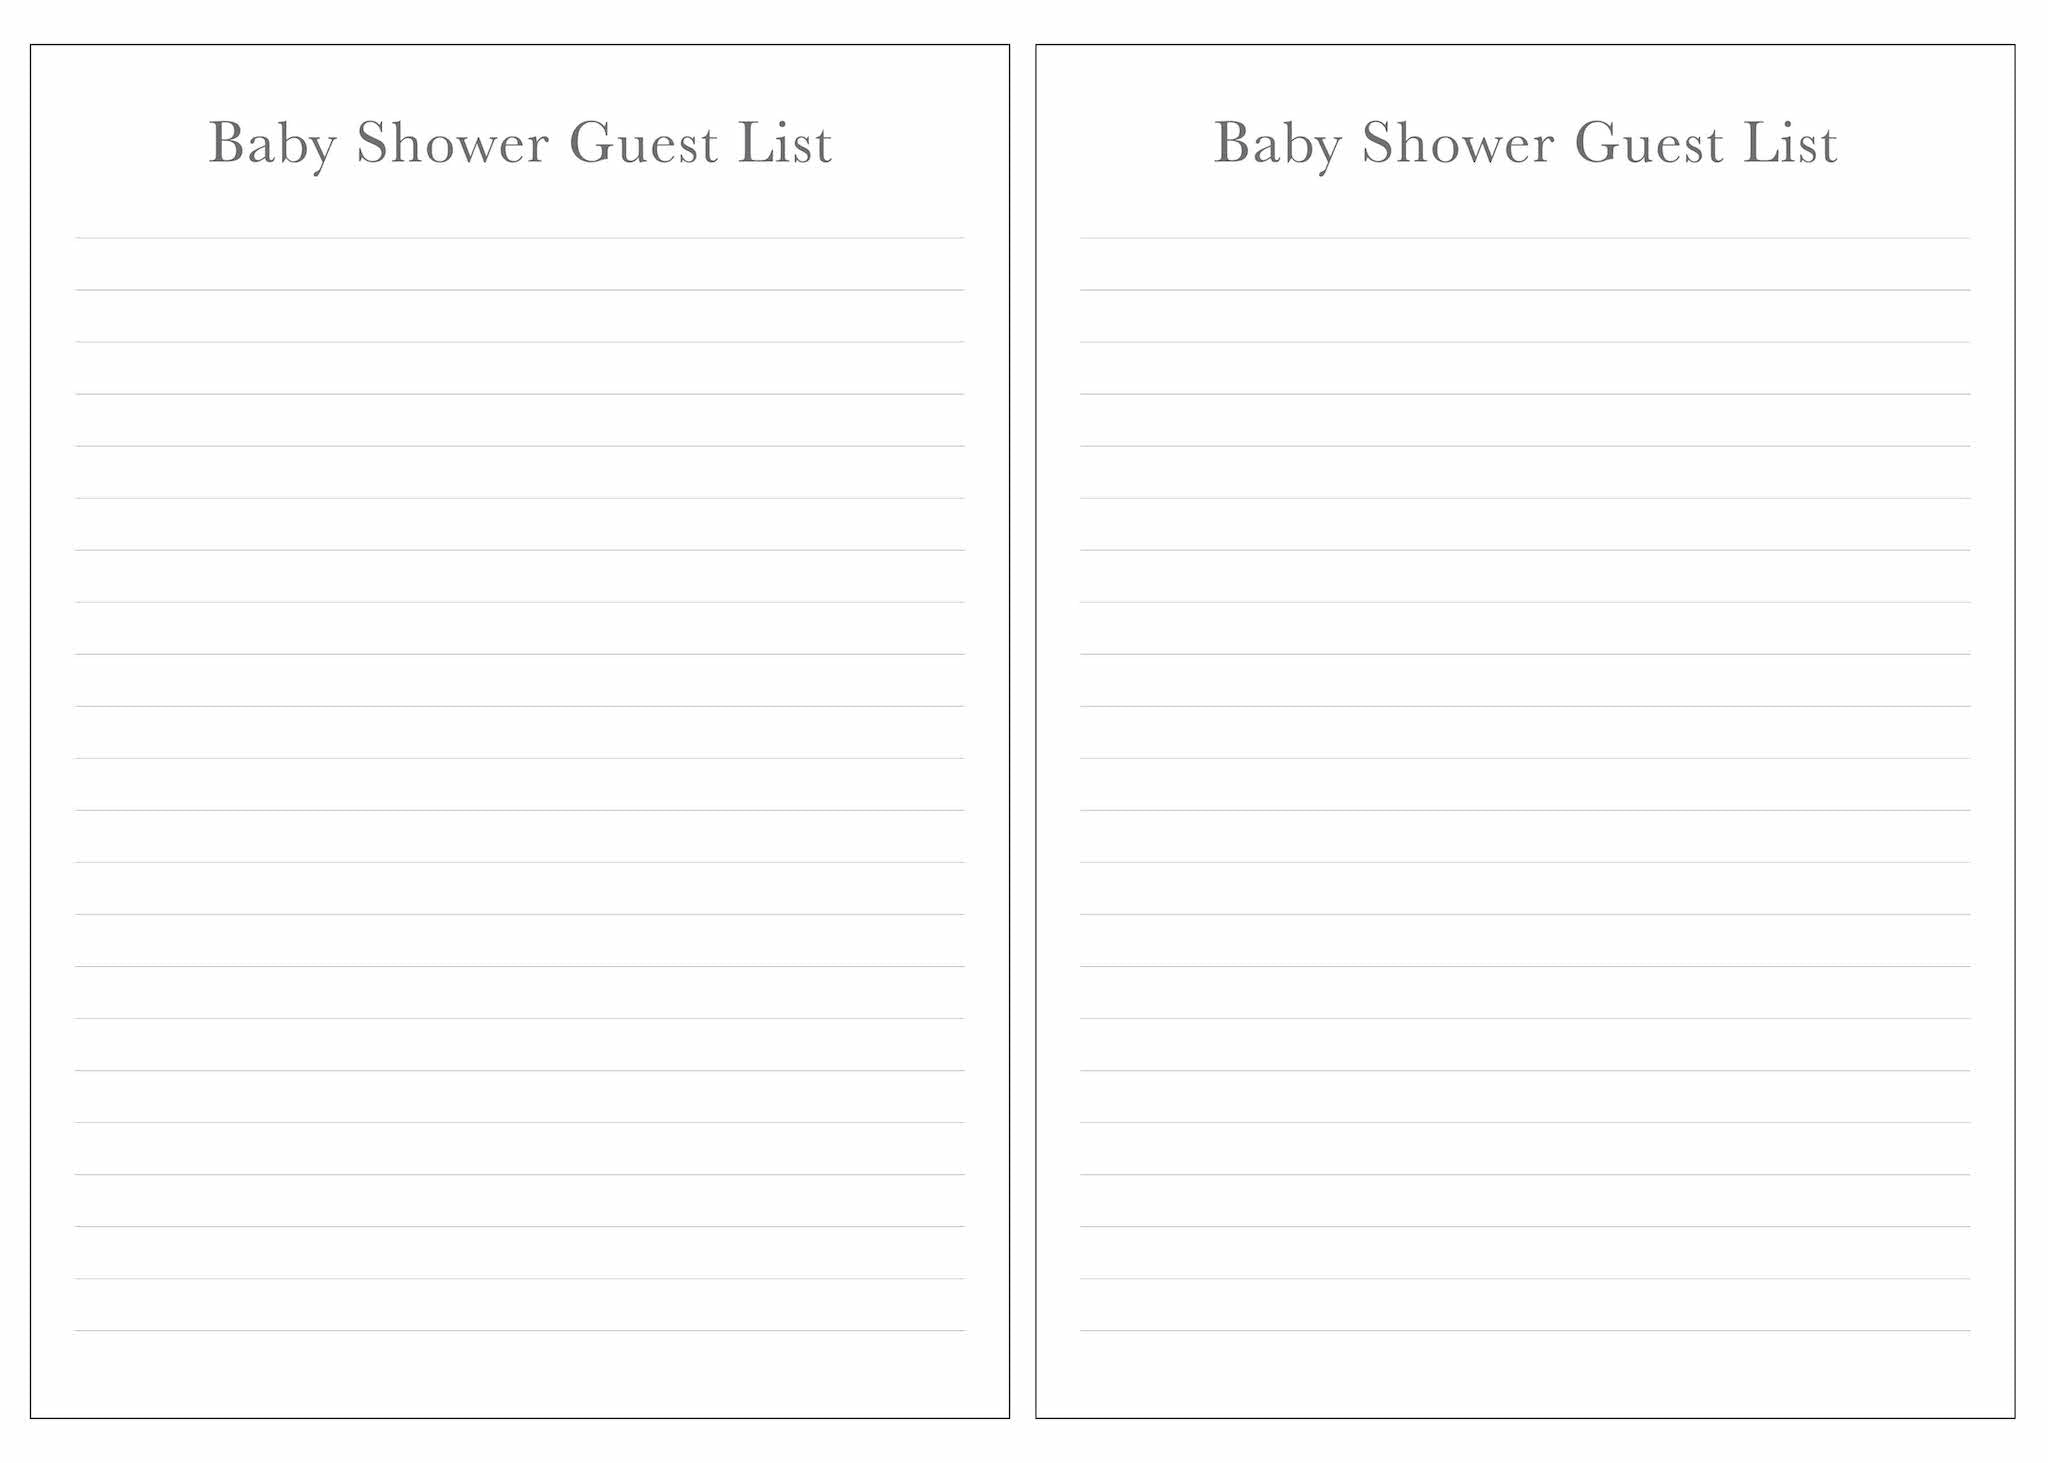 Baby Shower Guest List Page for Spiral Baby Book Only